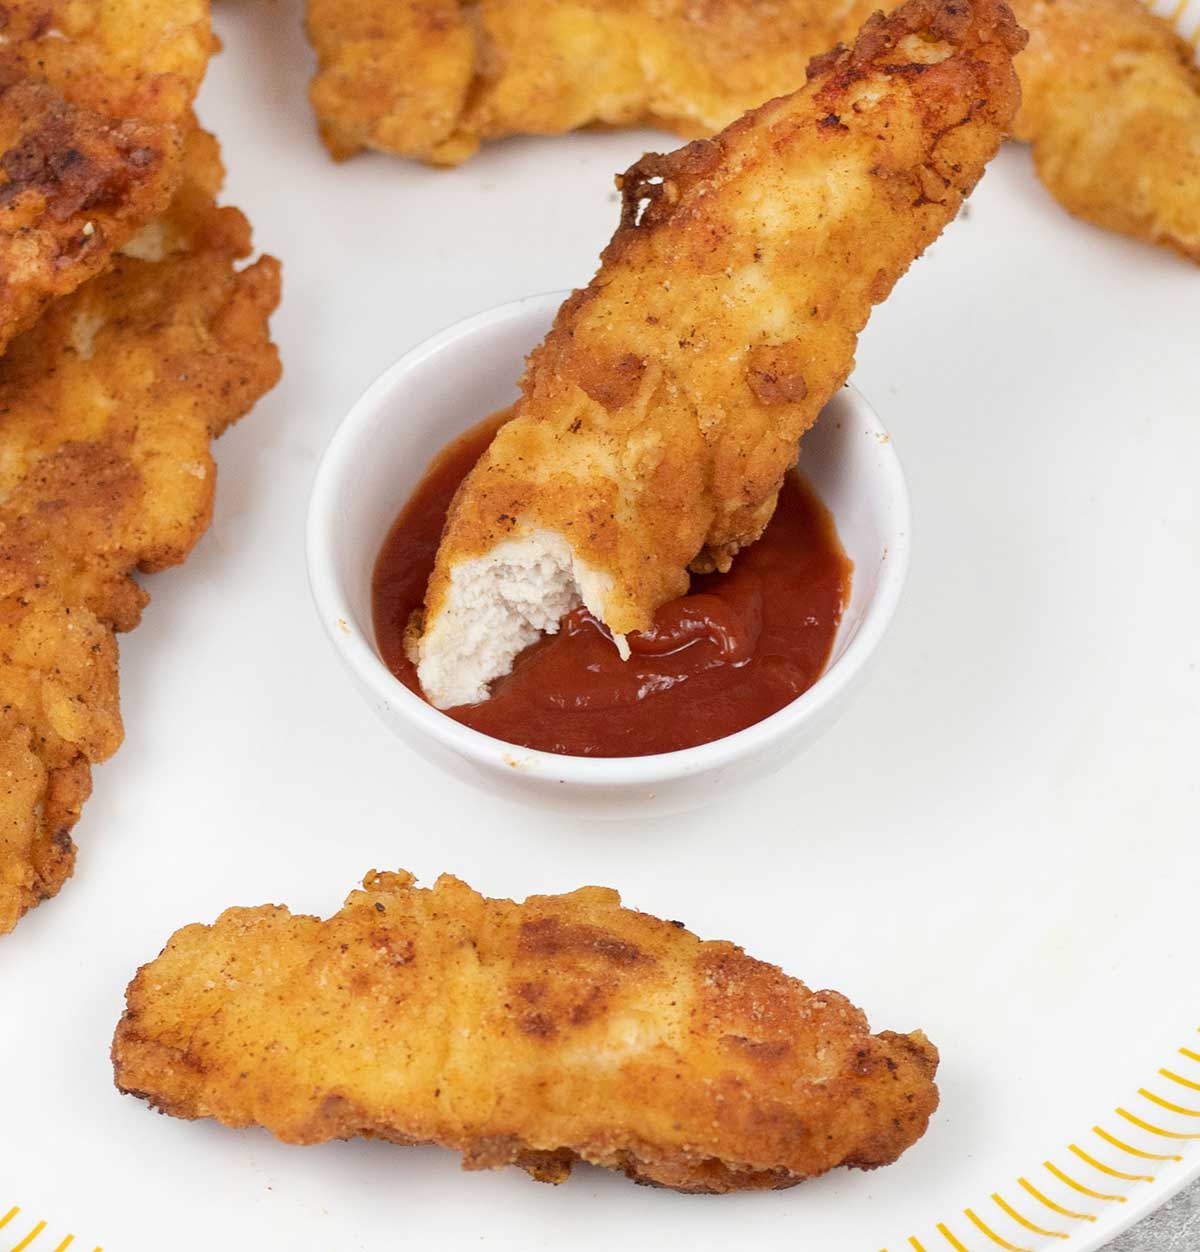 Fried chicken fingers dipped in a bowl of ketchup.